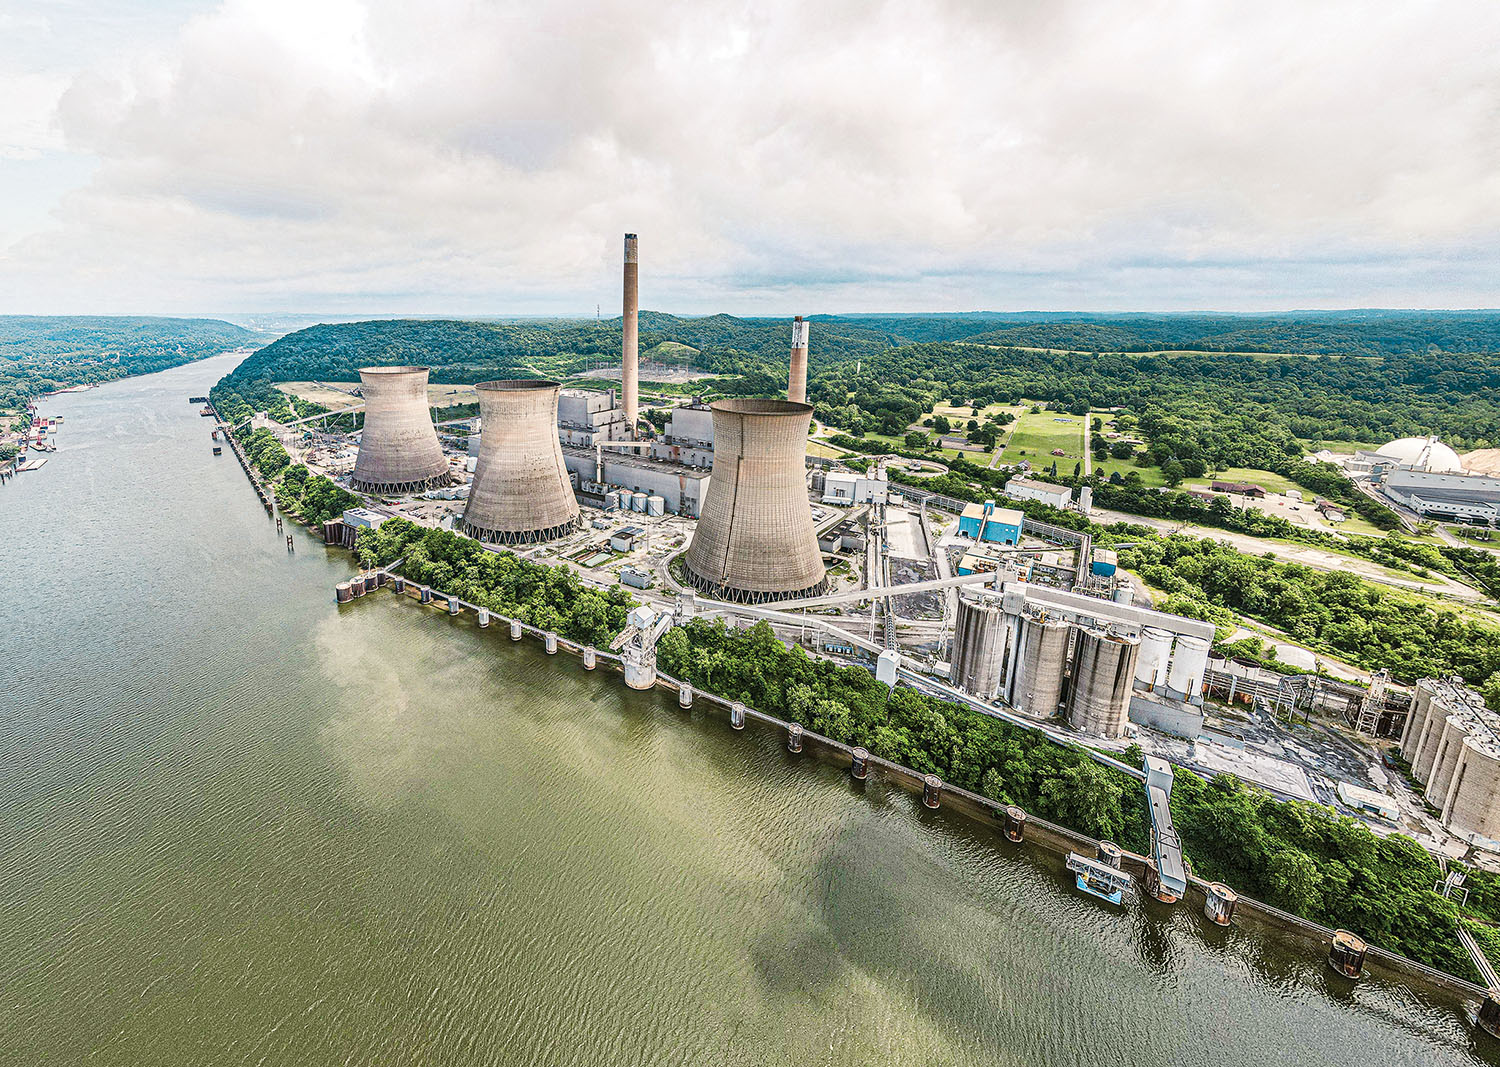 Drone photo shows the extensive river infrastructure at the former coal-fired power plant site in Shippingport, Pa., at Miles 33 and 34 on the Ohio River. It is one of two sites the Frontier Group of Companies purchased May 31 and plans to redevelop. The new name of the site is the Shippingport Industrial Park. (Photo courtesy of Frontier Group of Companies)